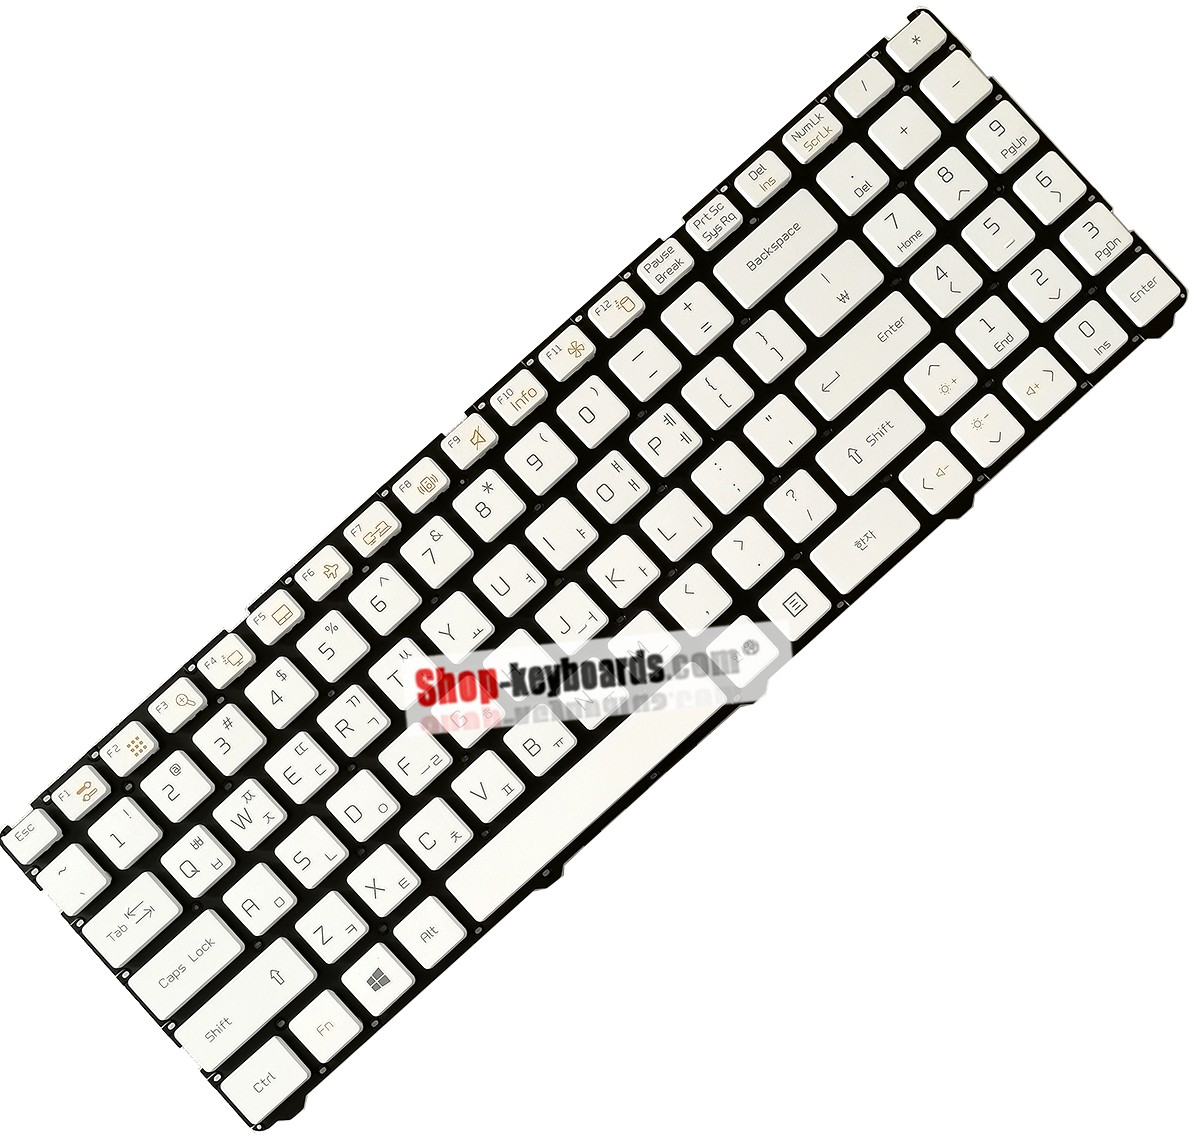 LG MP-12K73CH-9208 Keyboard replacement